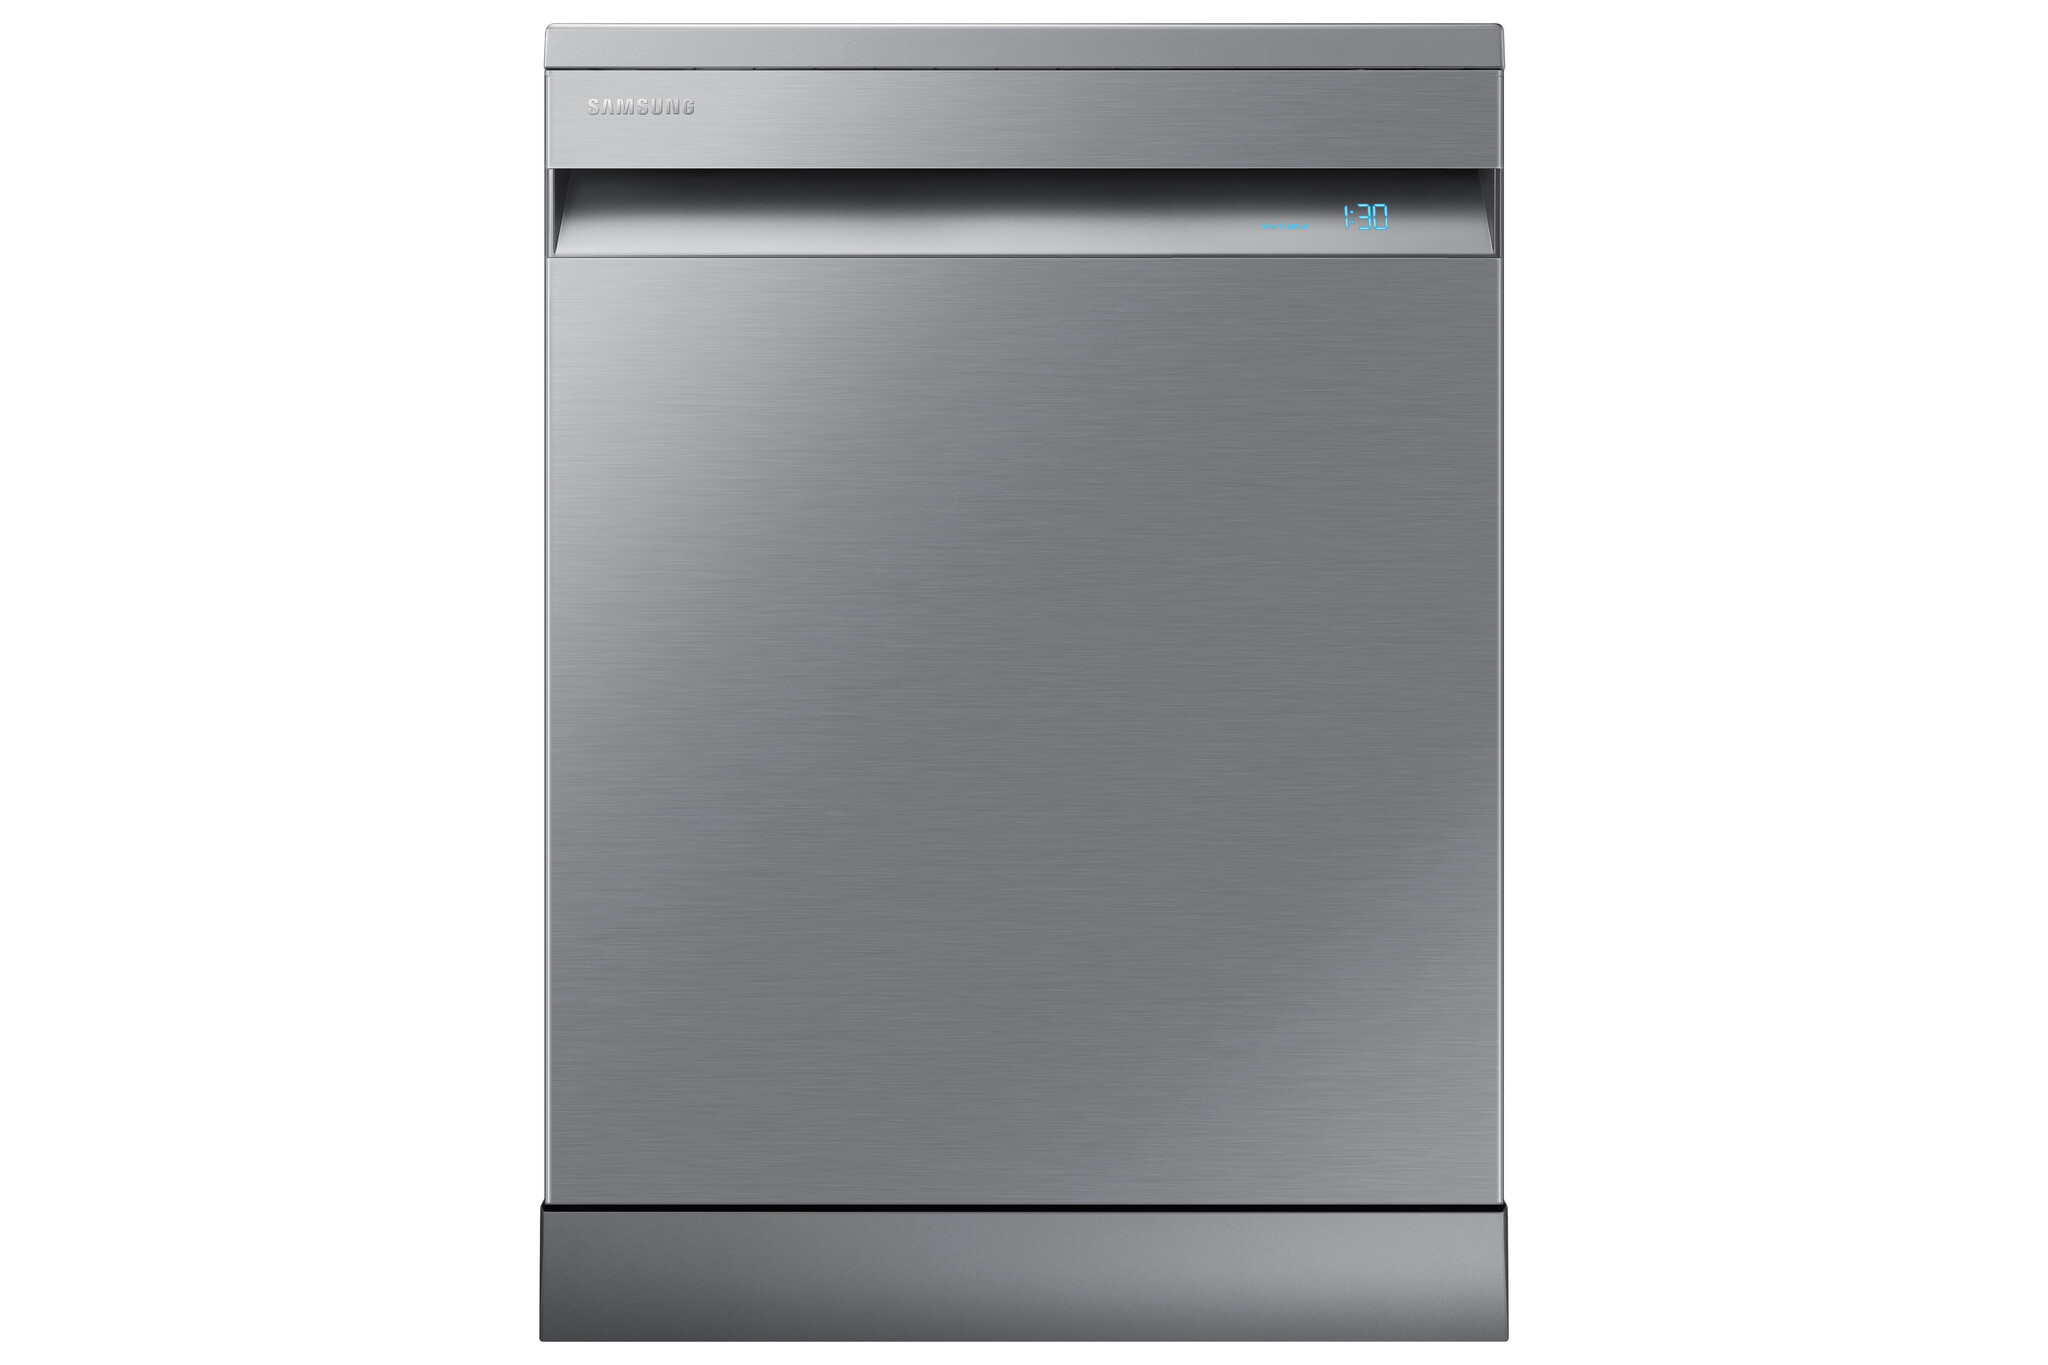 Samsung Series 11 DW60A8060FS Wifi Connected Standard Dishwasher – Stainless Steel – B Rated #365857